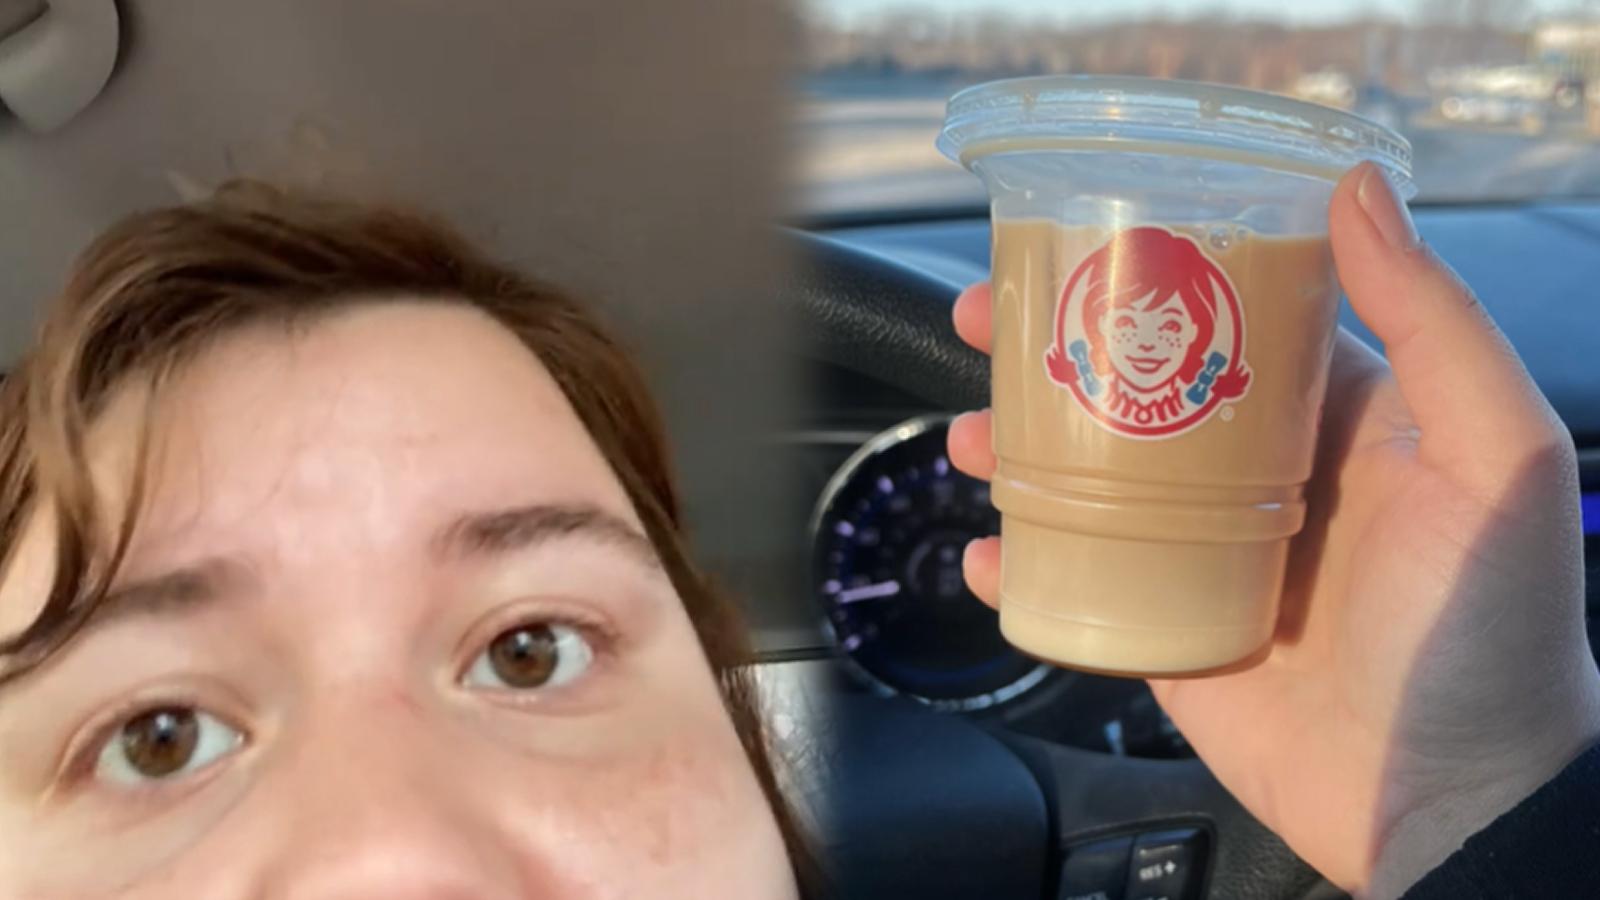 Customer claims Wendy's secretly downsized cups following “surge pricing” fail